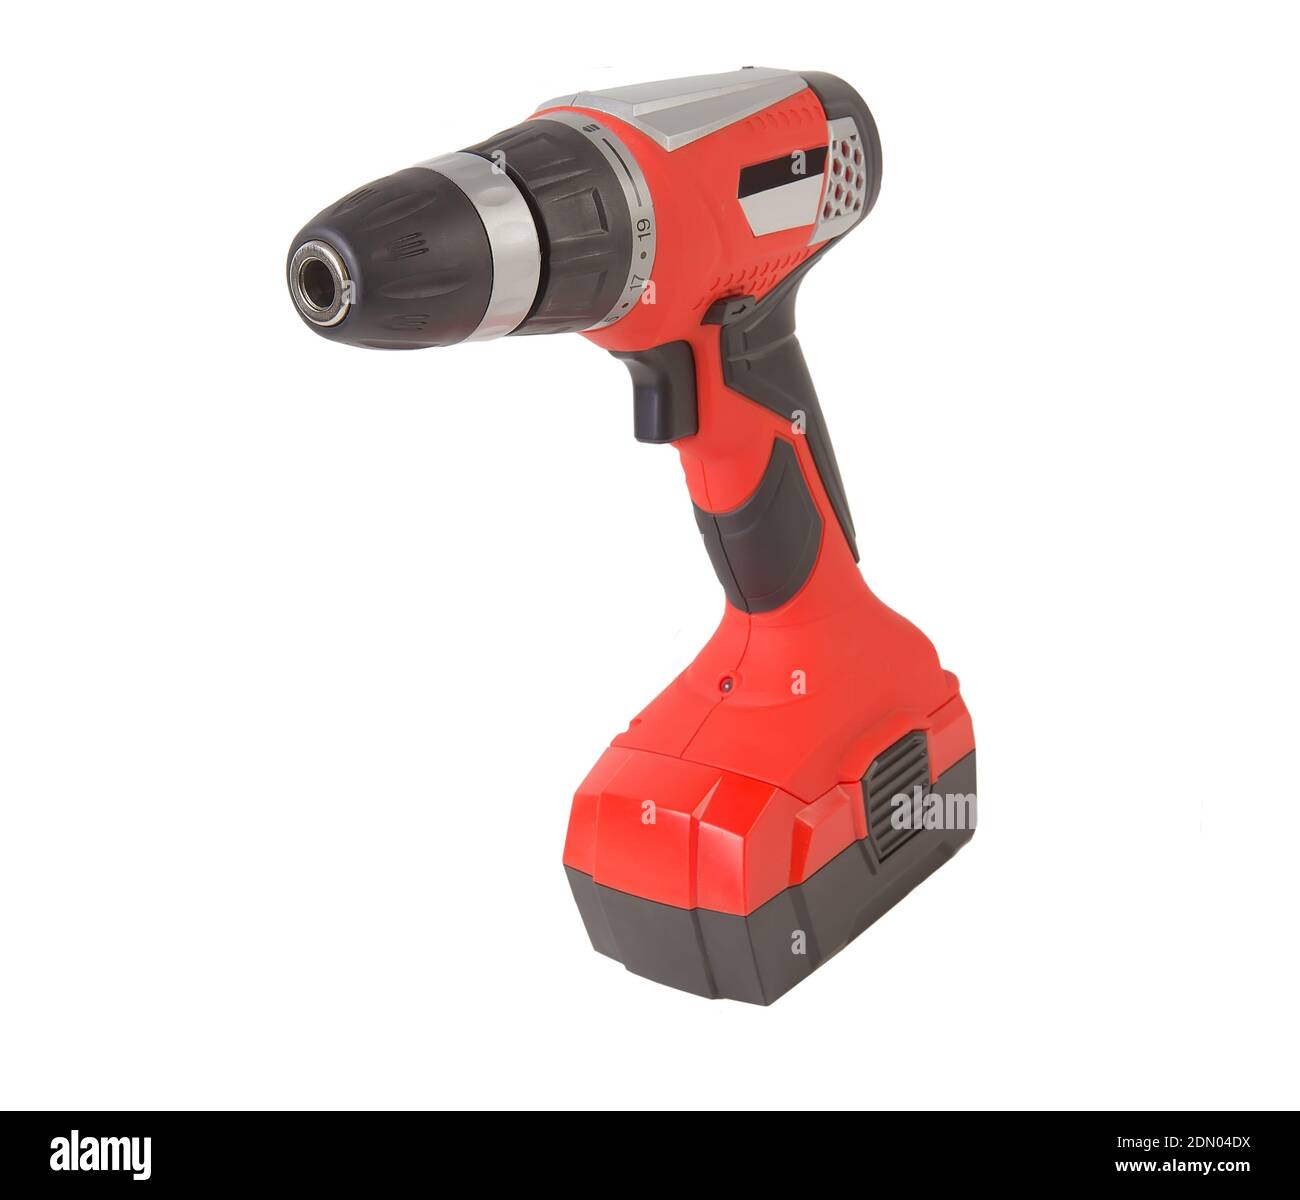 https://c8.alamy.com/comp/2DN04DX/rechargeable-drill-red-isolated-on-white-background-2DN04DX.jpg